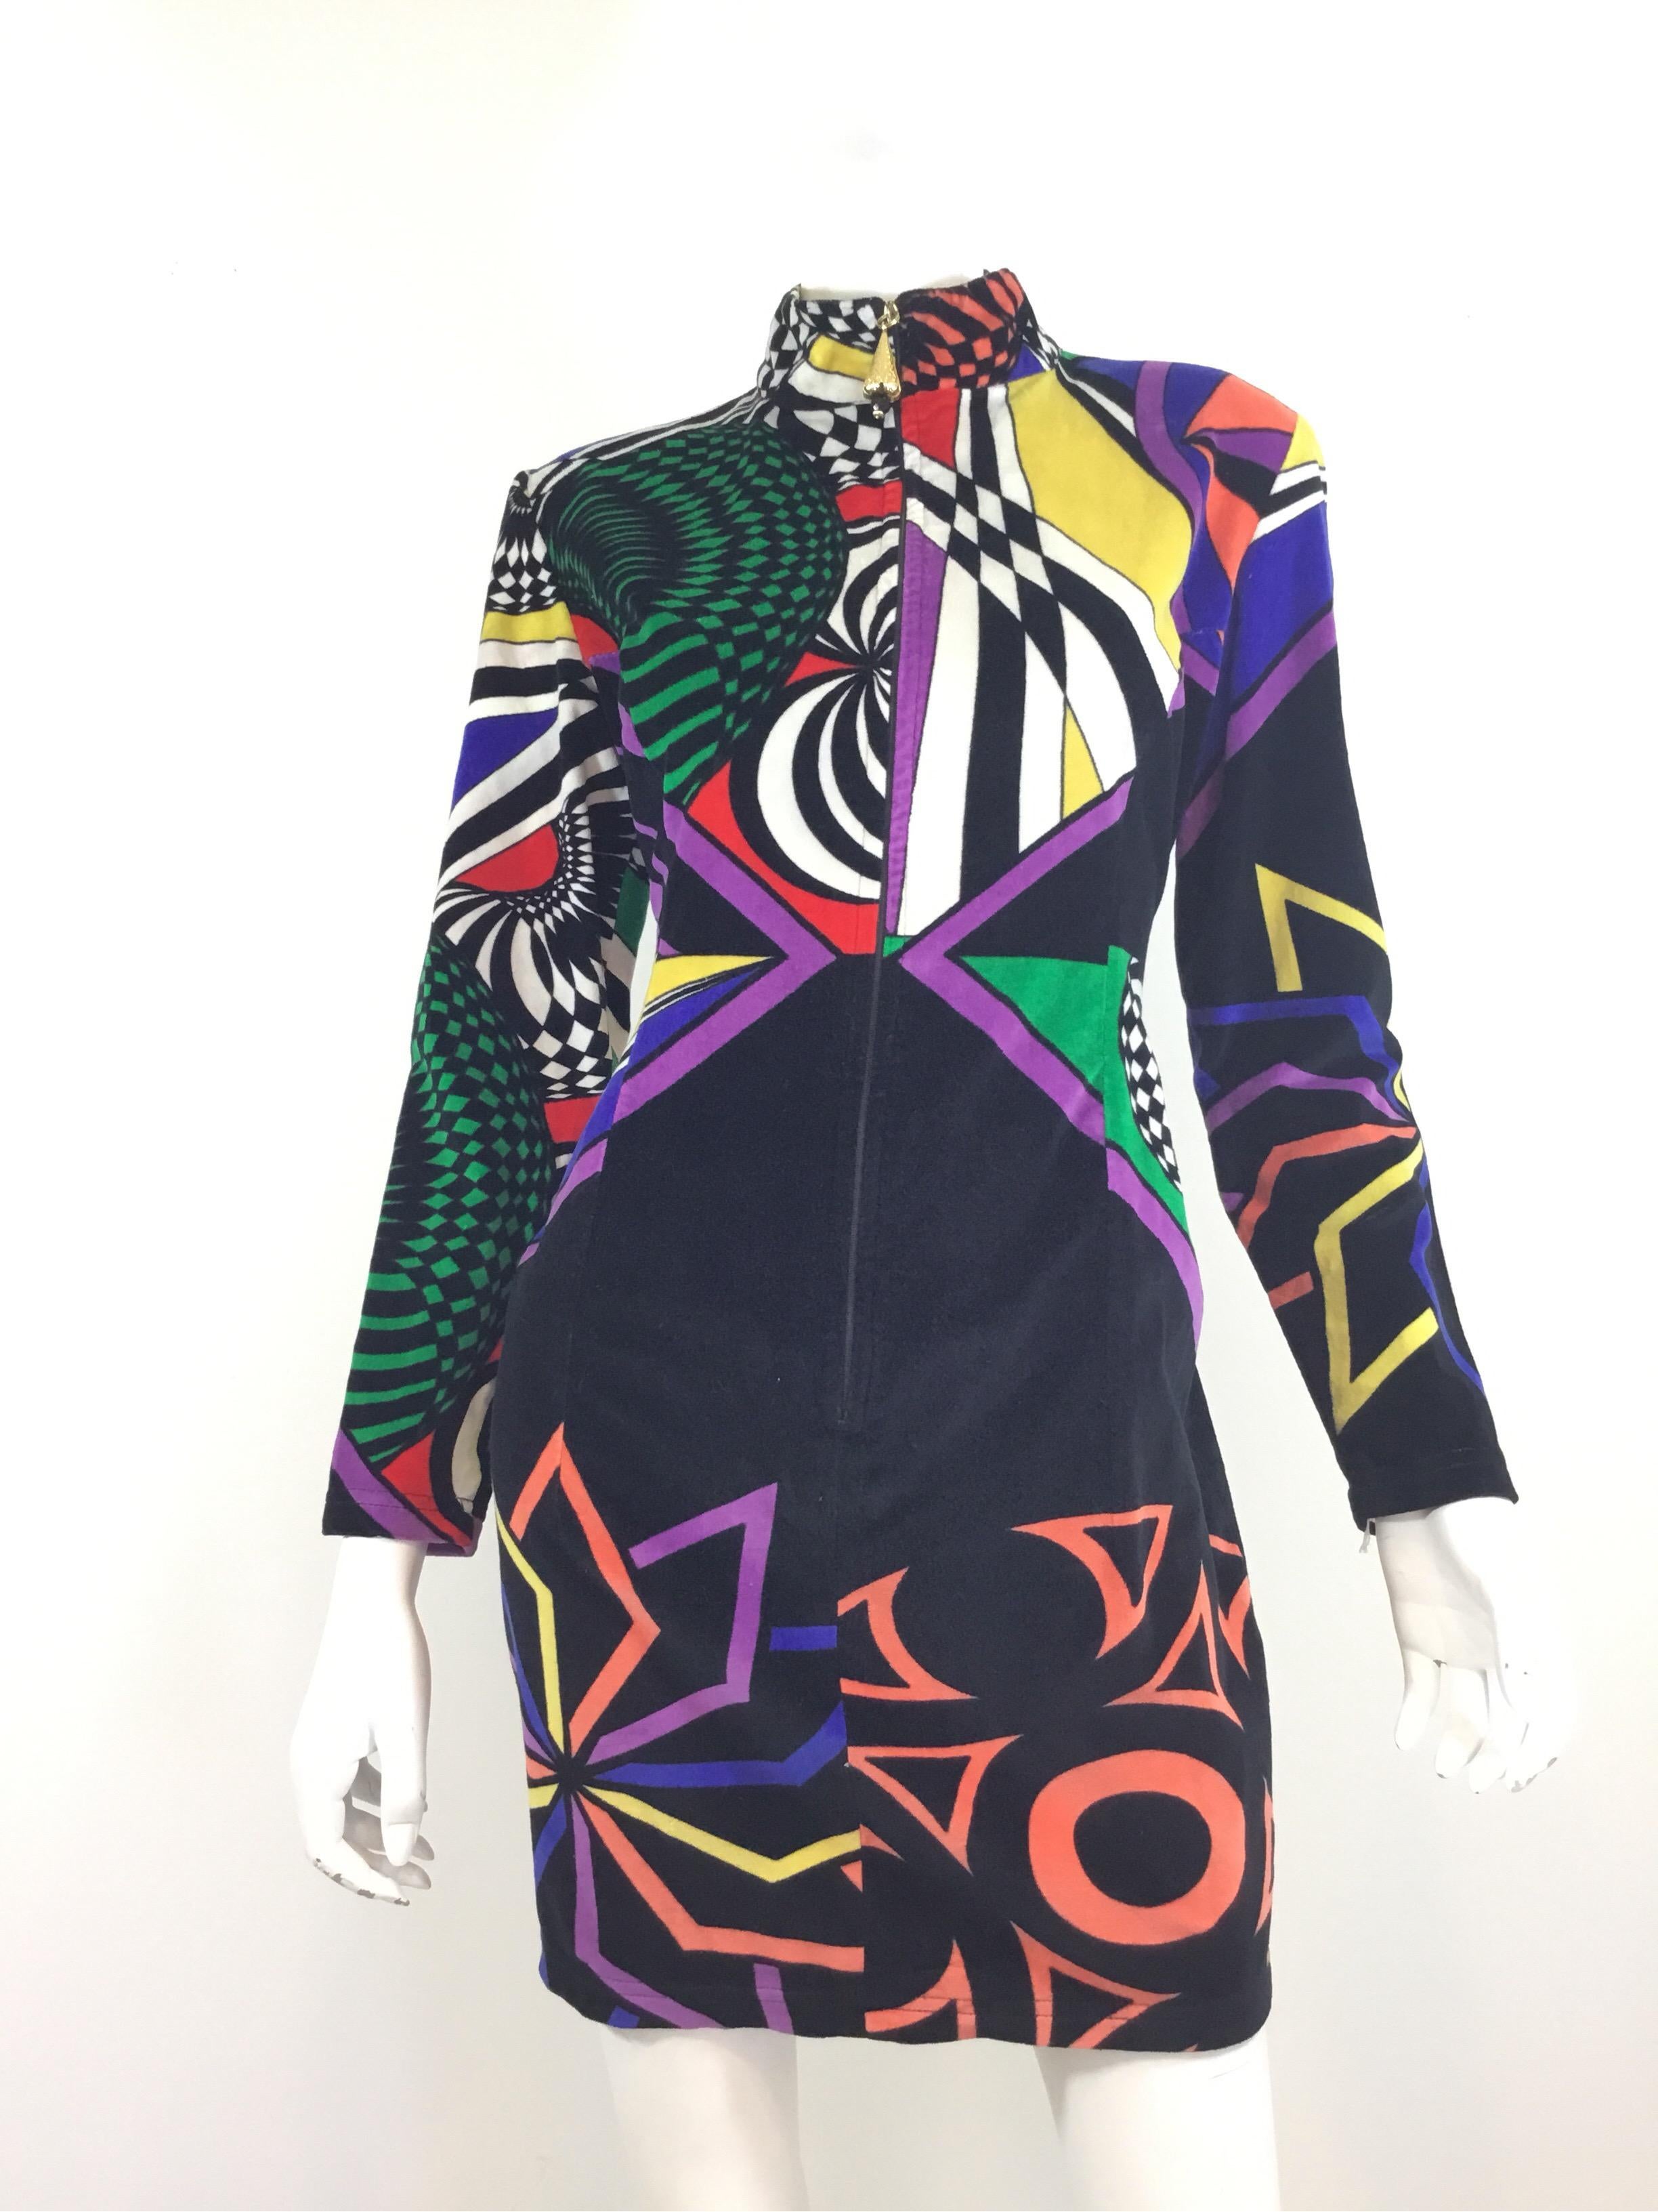 Versus Versace vintage dress in a multicolored velvet with a zipper fastening at the neck. Made in Italy.

Measurements:

Bust 36”, sleeves 22”, shoulder to shoulder 17”, waist 30”, hips 38”, length 35”